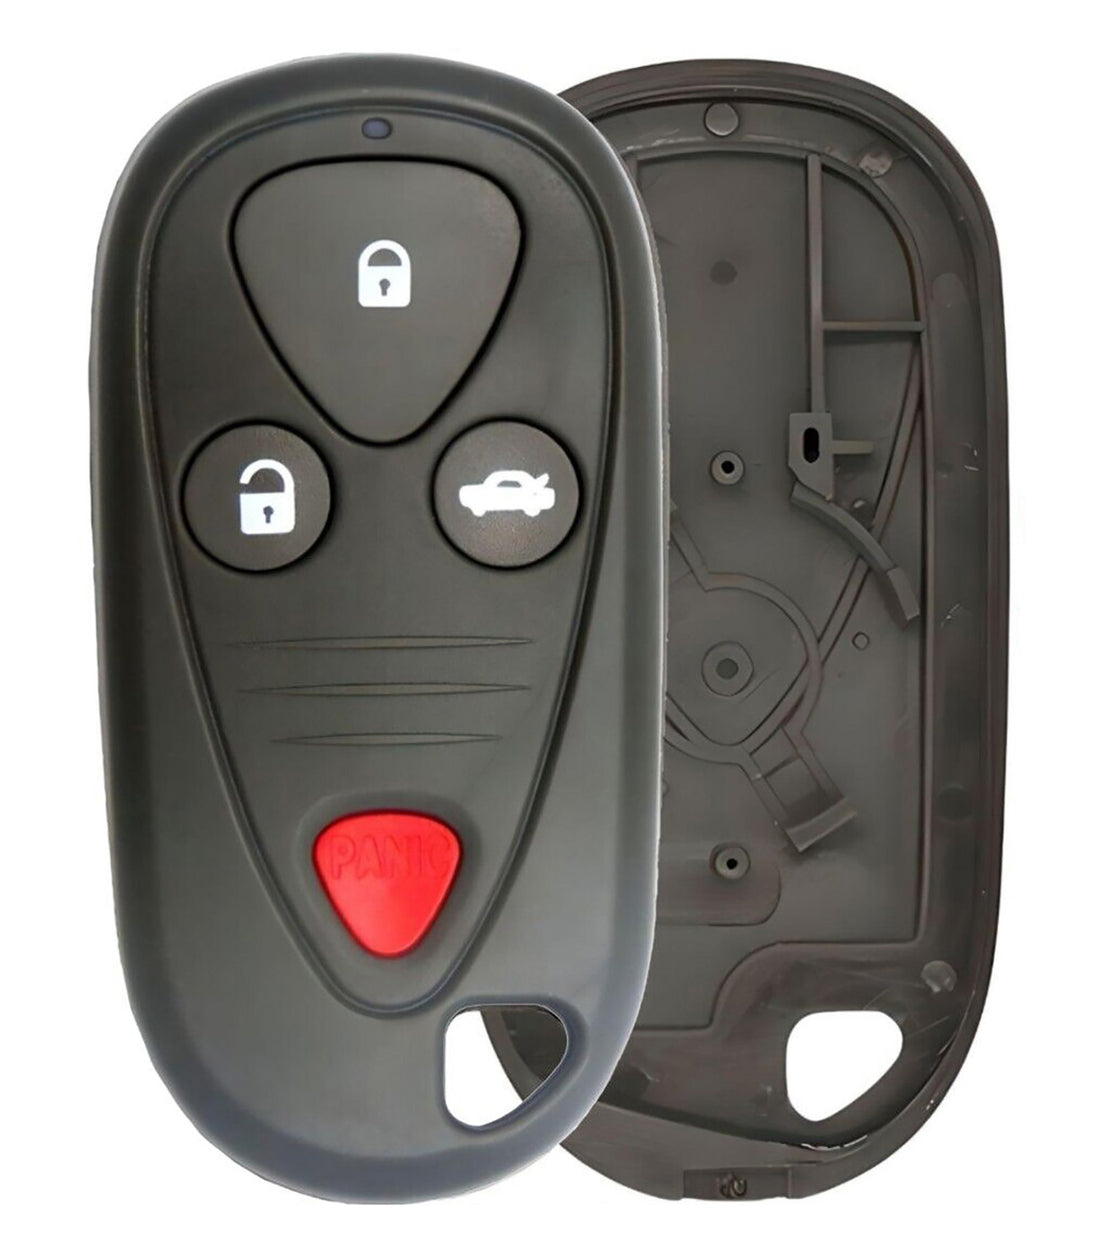 1x New Replacement Key Fob Remote SHELL / CASE Compatible with & Fit For Acura Vehicles - MPN E4EG8D-444H-A-08 (NO electronics or Chip inside)